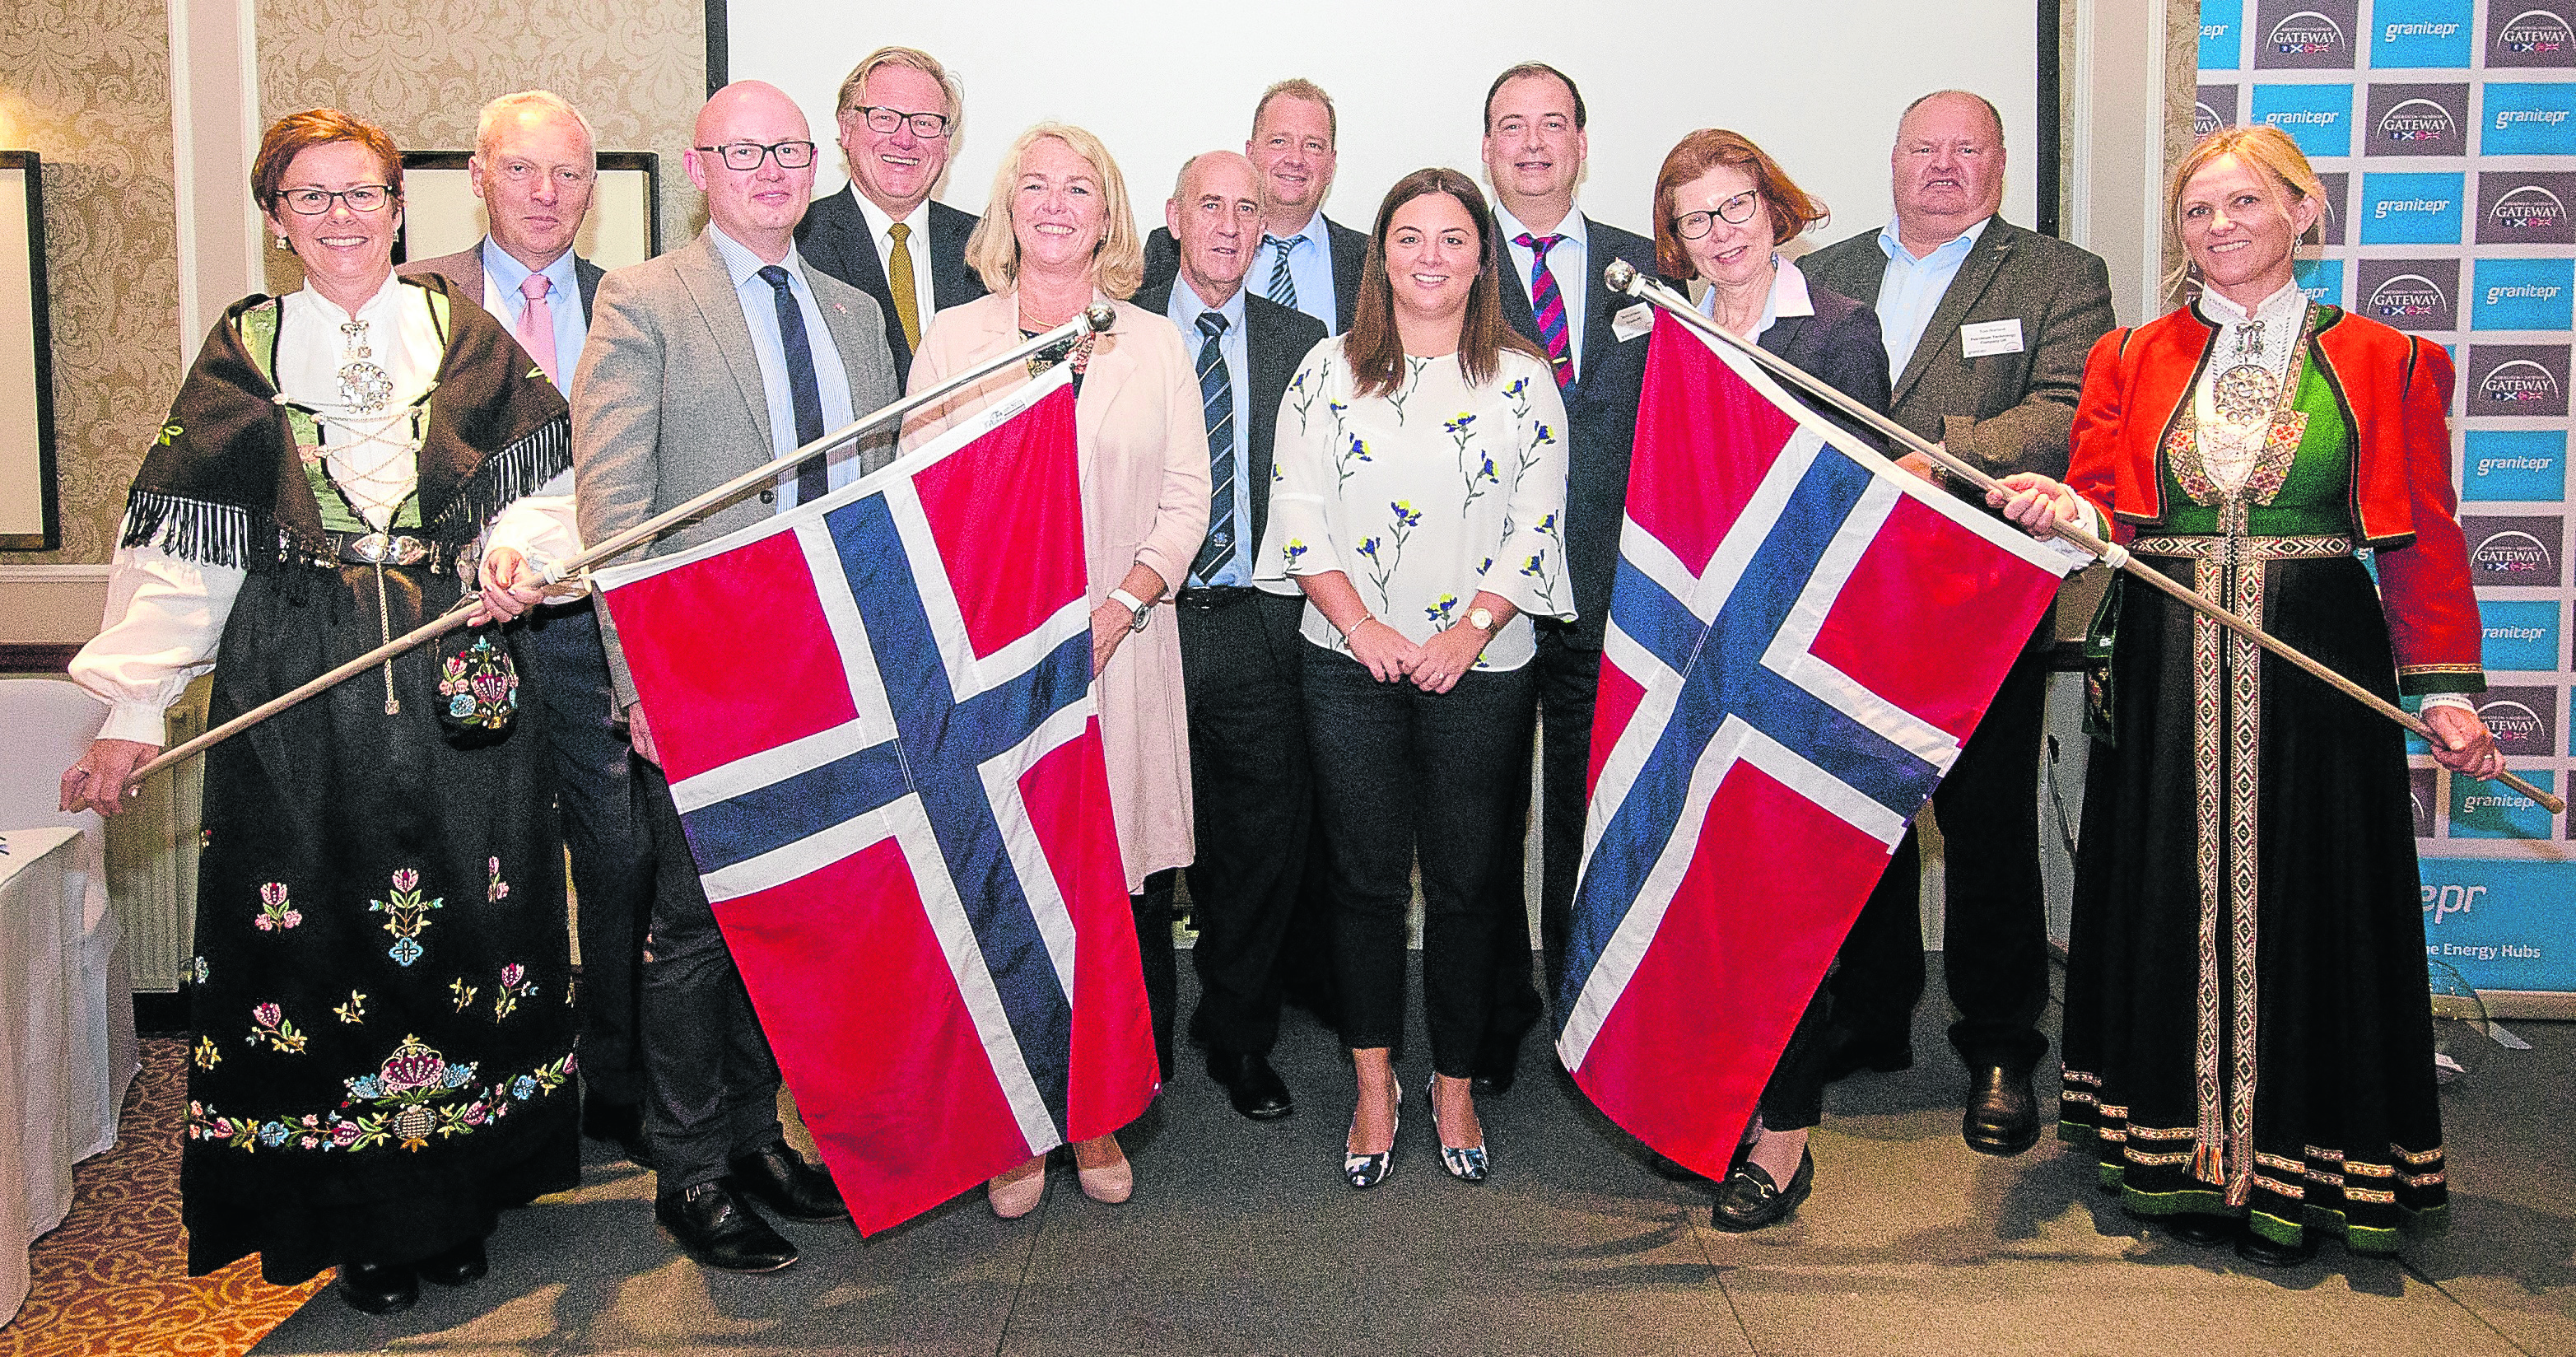 The fifth annual Aberdeen-Norway Gateway event attracts many delegates